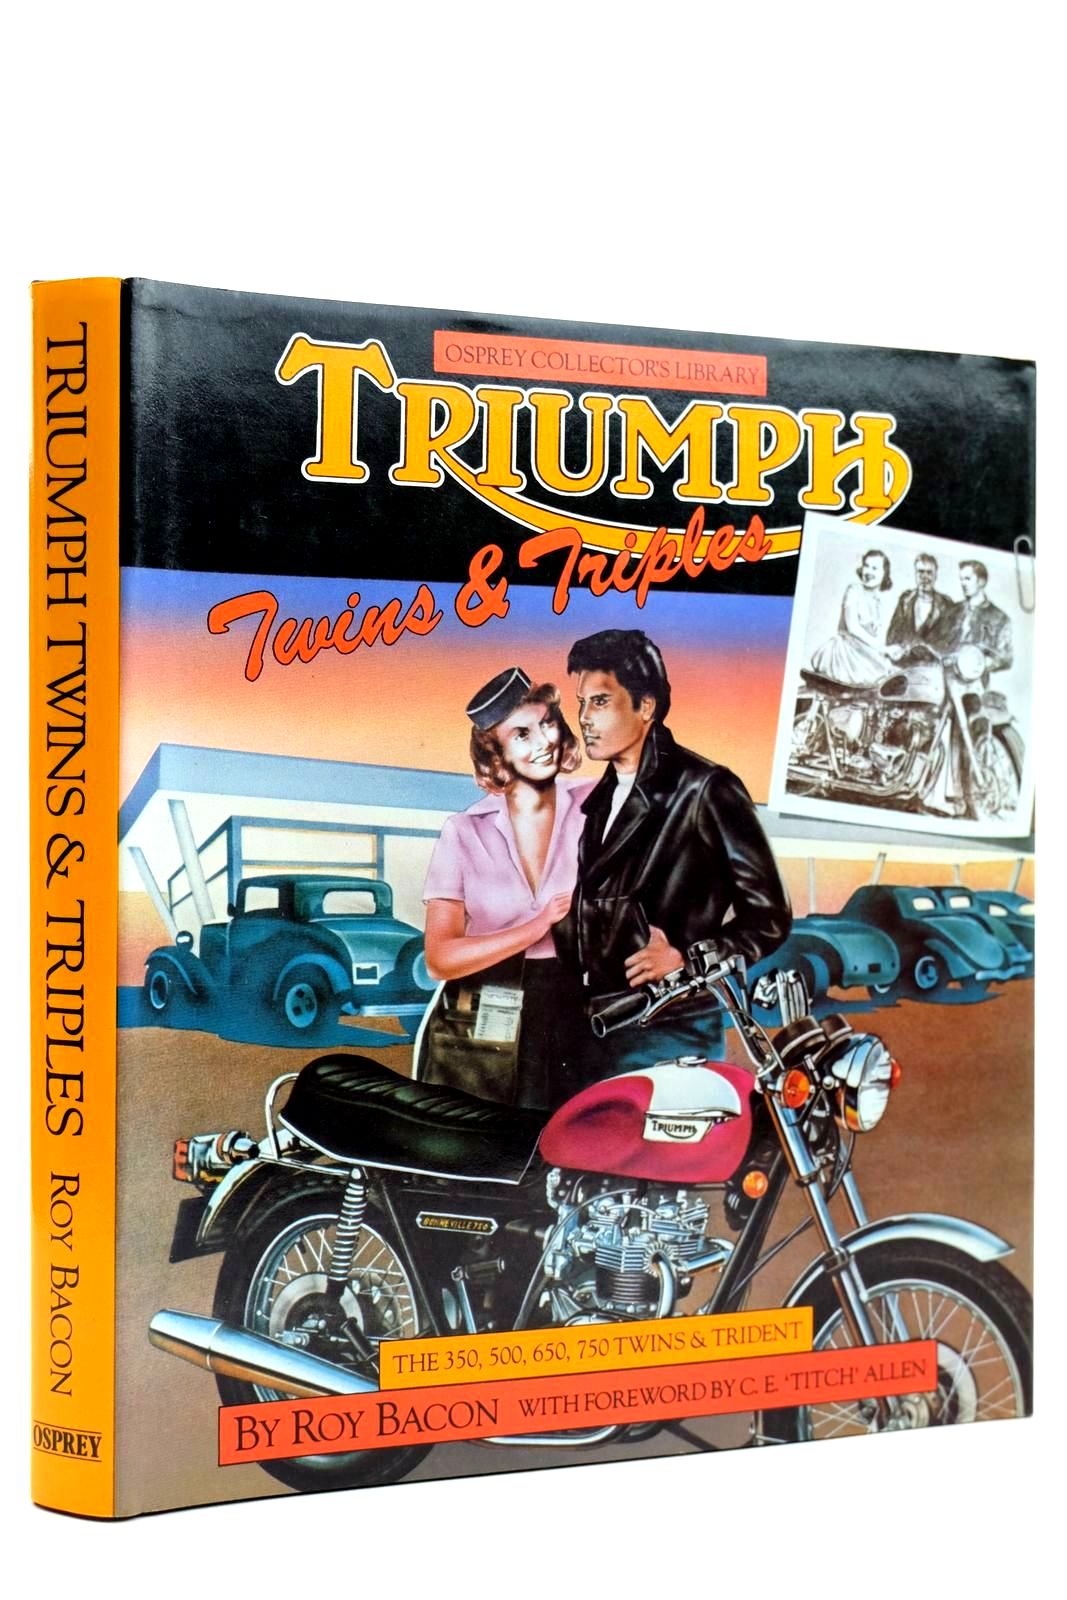 Photo of TRIUMPH TWINS &AMP; TRIPLES THE 350, 500, 650, 750 TWINS AND TRIDENT written by Bacon, Roy published by Osprey Publishing (STOCK CODE: 2131993)  for sale by Stella & Rose's Books